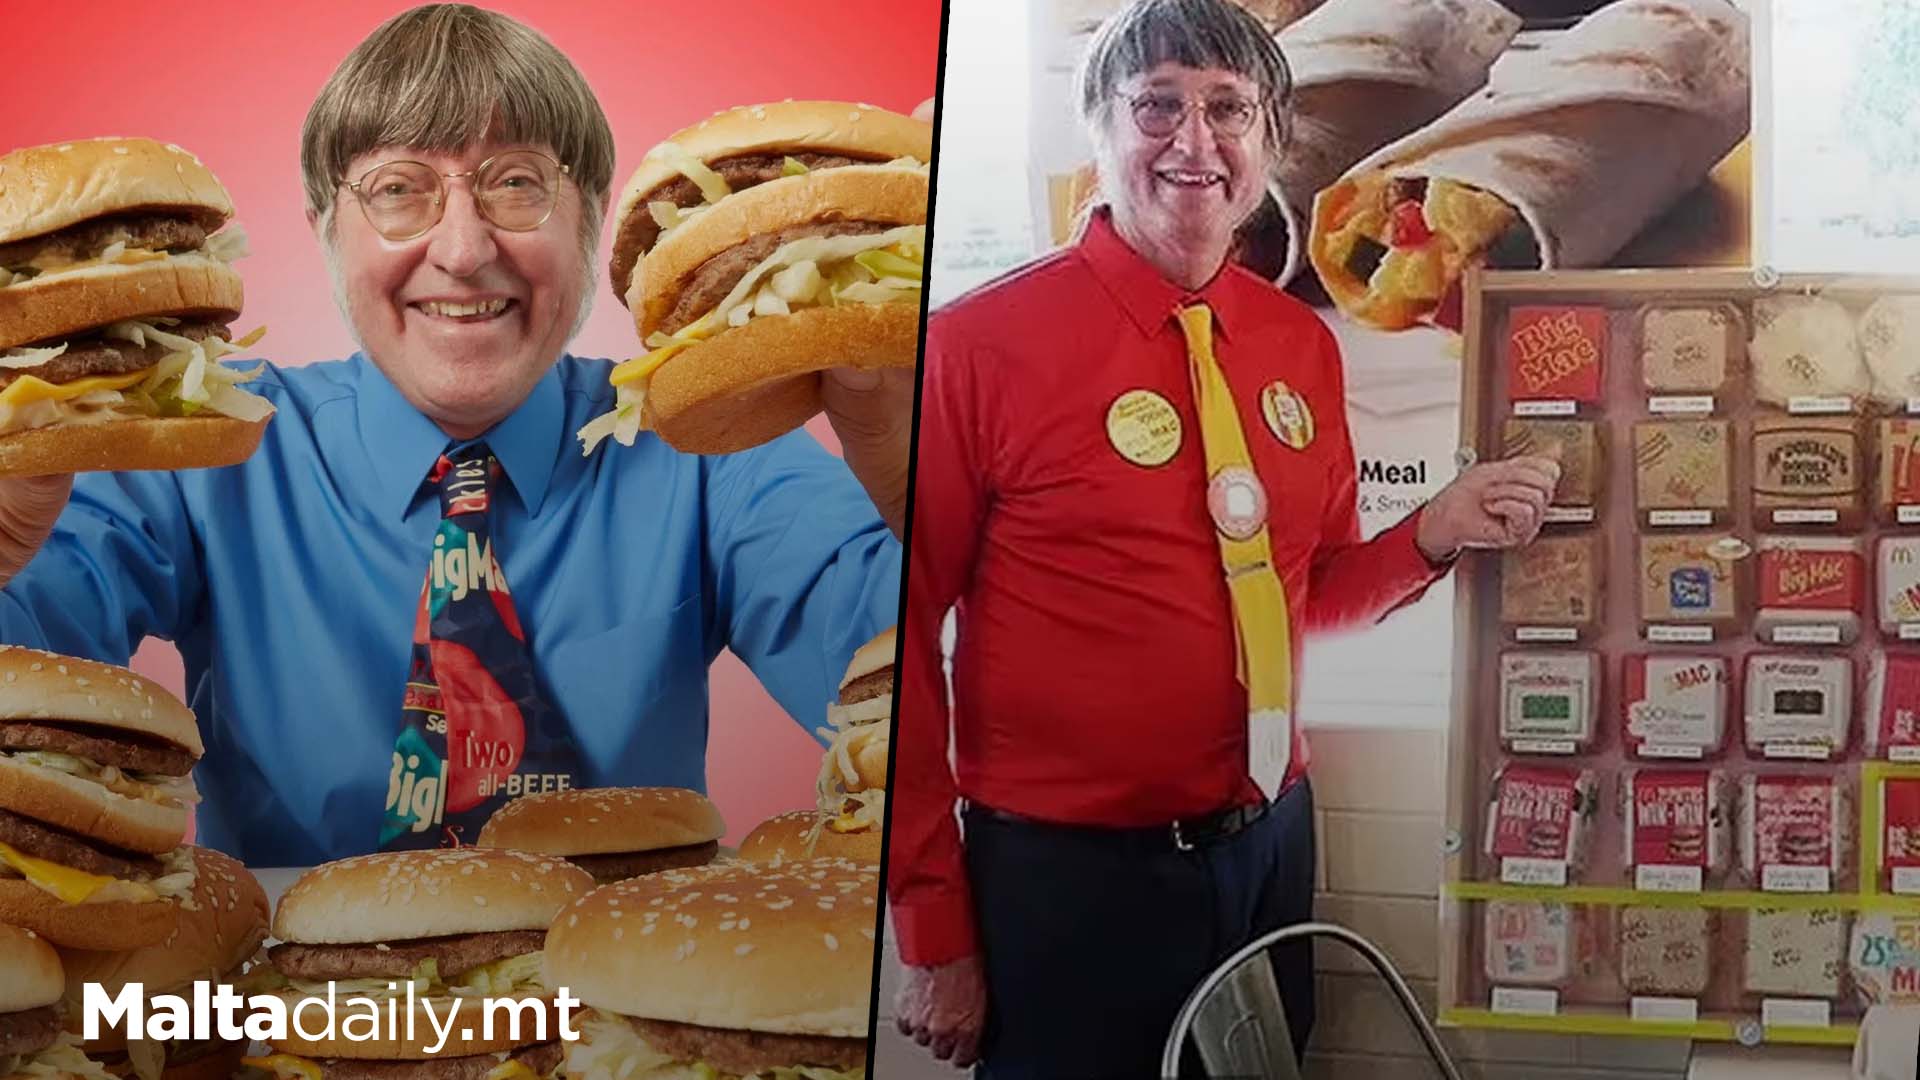 70 Year Old Sets World Record For Eating Over 34,000 Big Macs